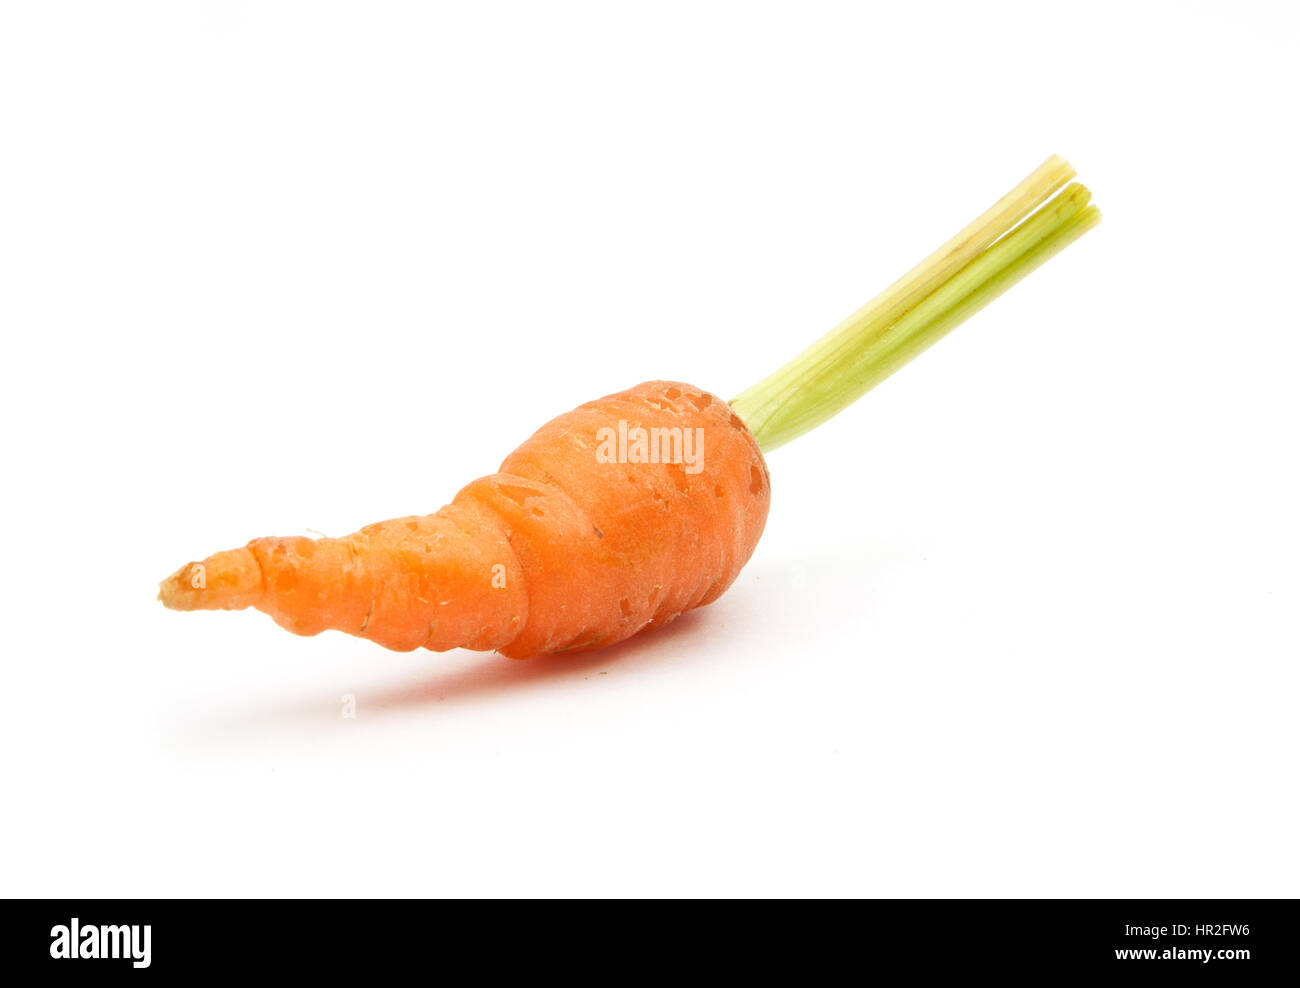 baby carrot immature carrot on white background Stock Photo